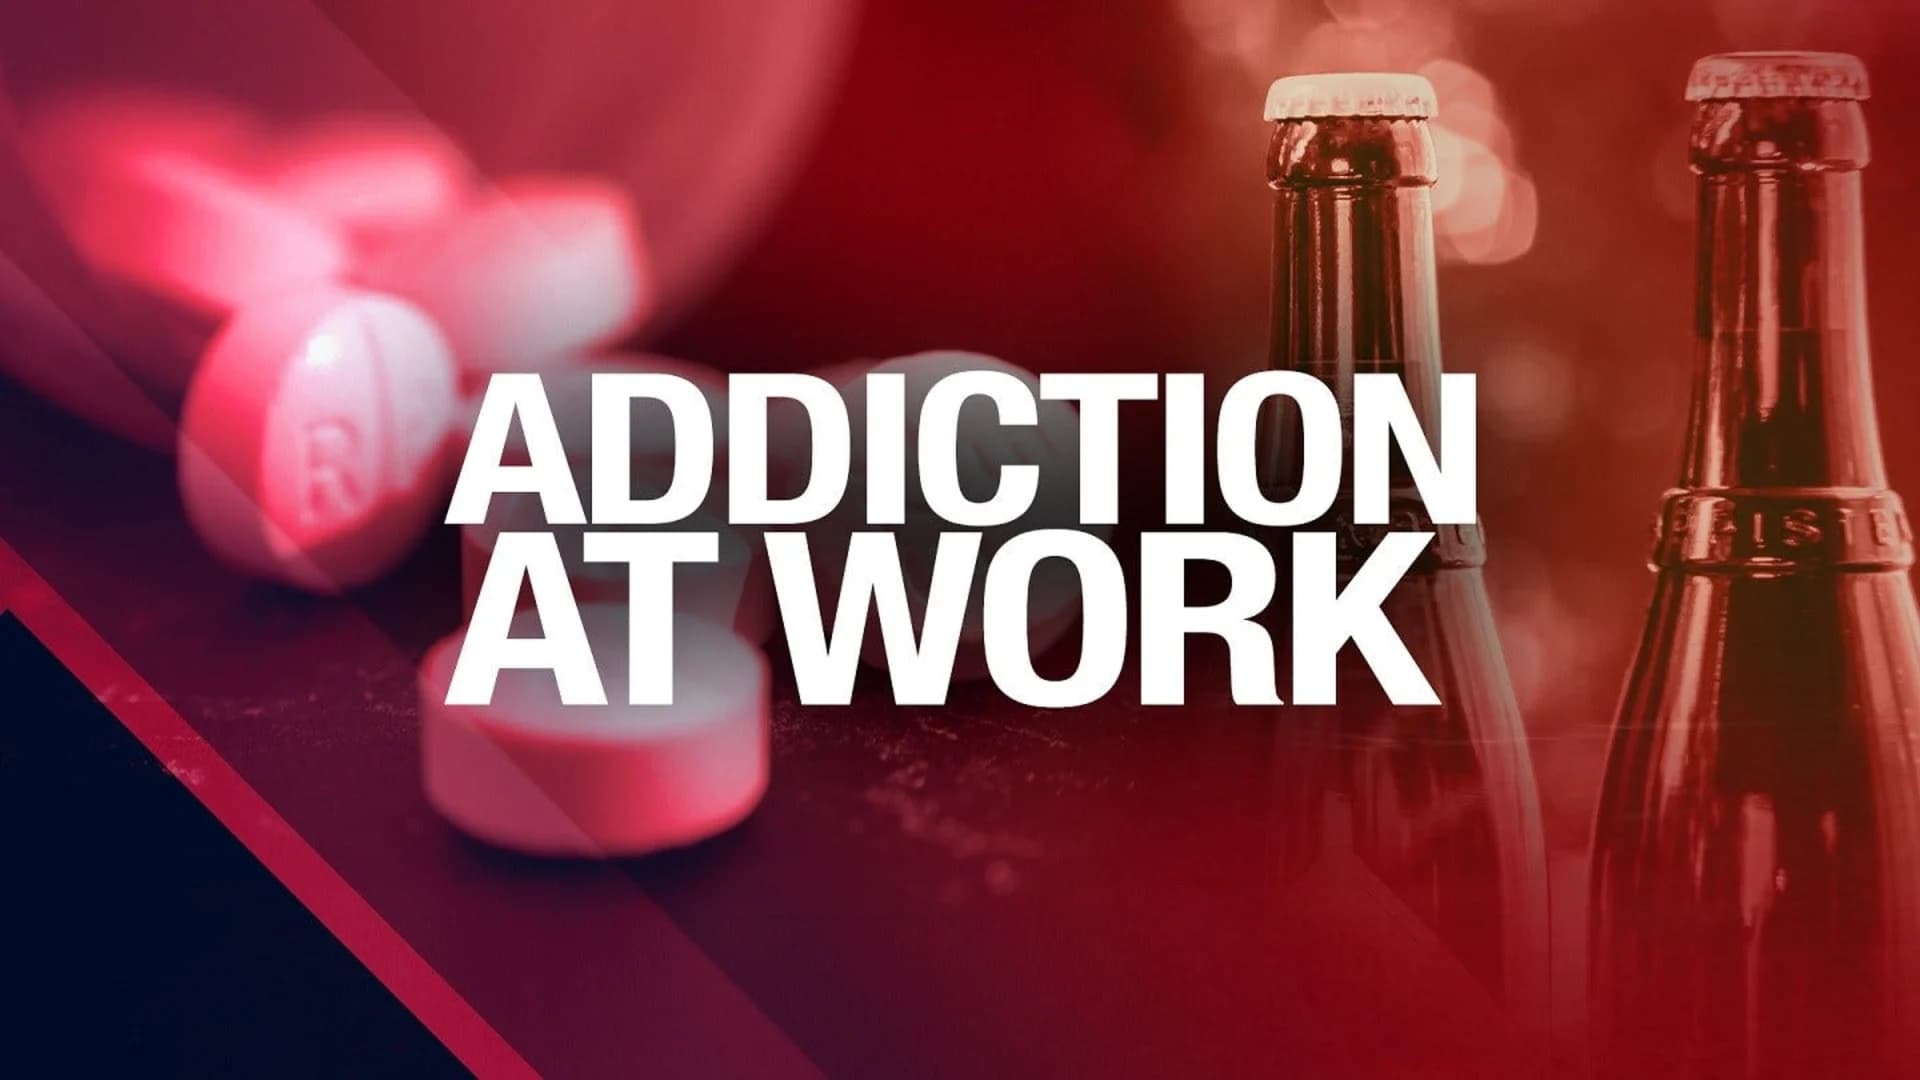 Survey: 23 percent of Americans use drugs, alcohol at work